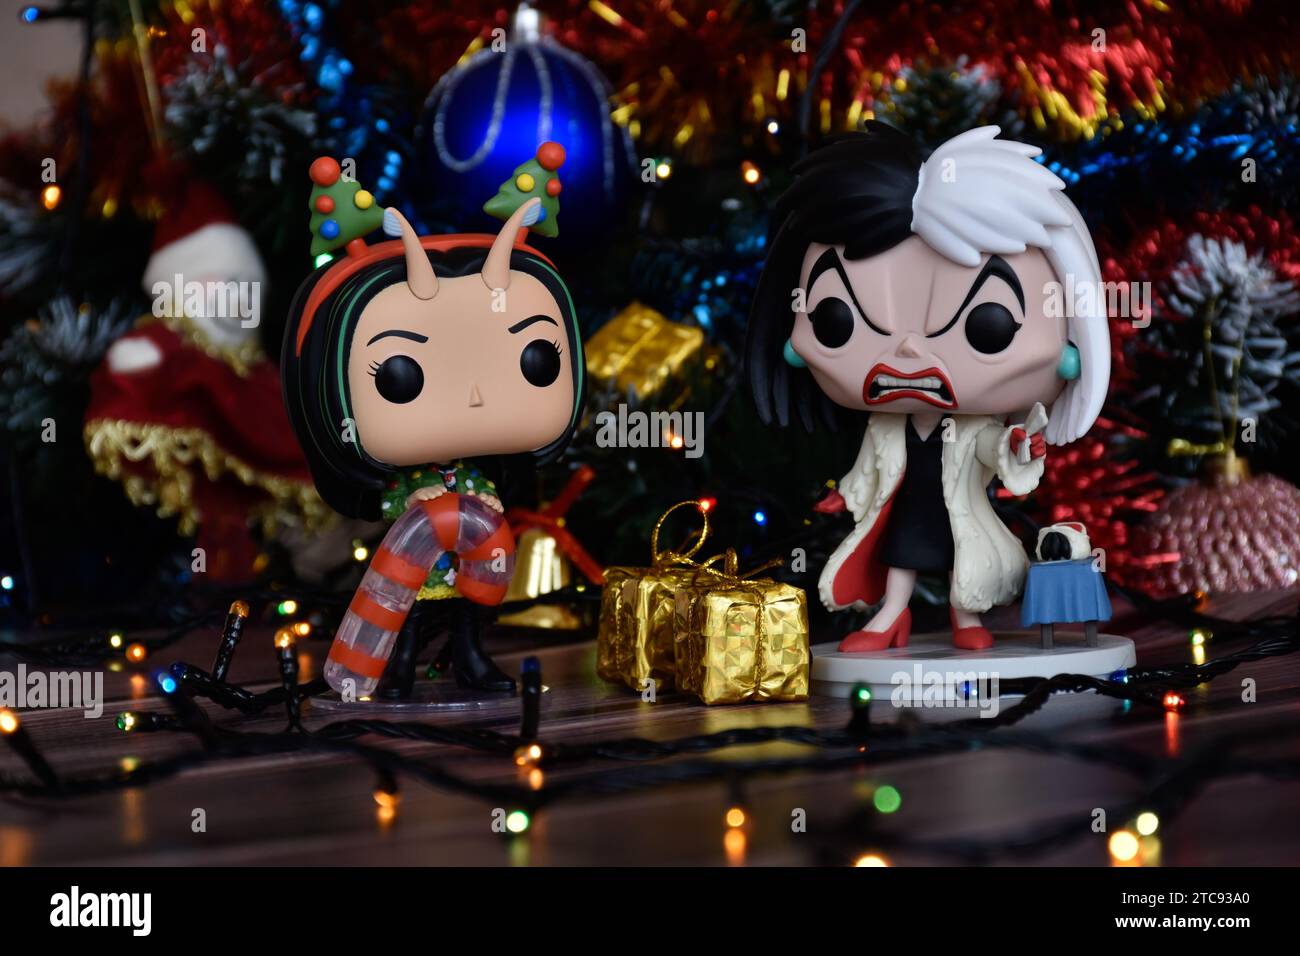 Funko Pop action figures of Mantis from Guardians of the Galaxy and Disney villain Cruella de Vil. Christmas tree, gift boxes, colorful lights. Stock Photo